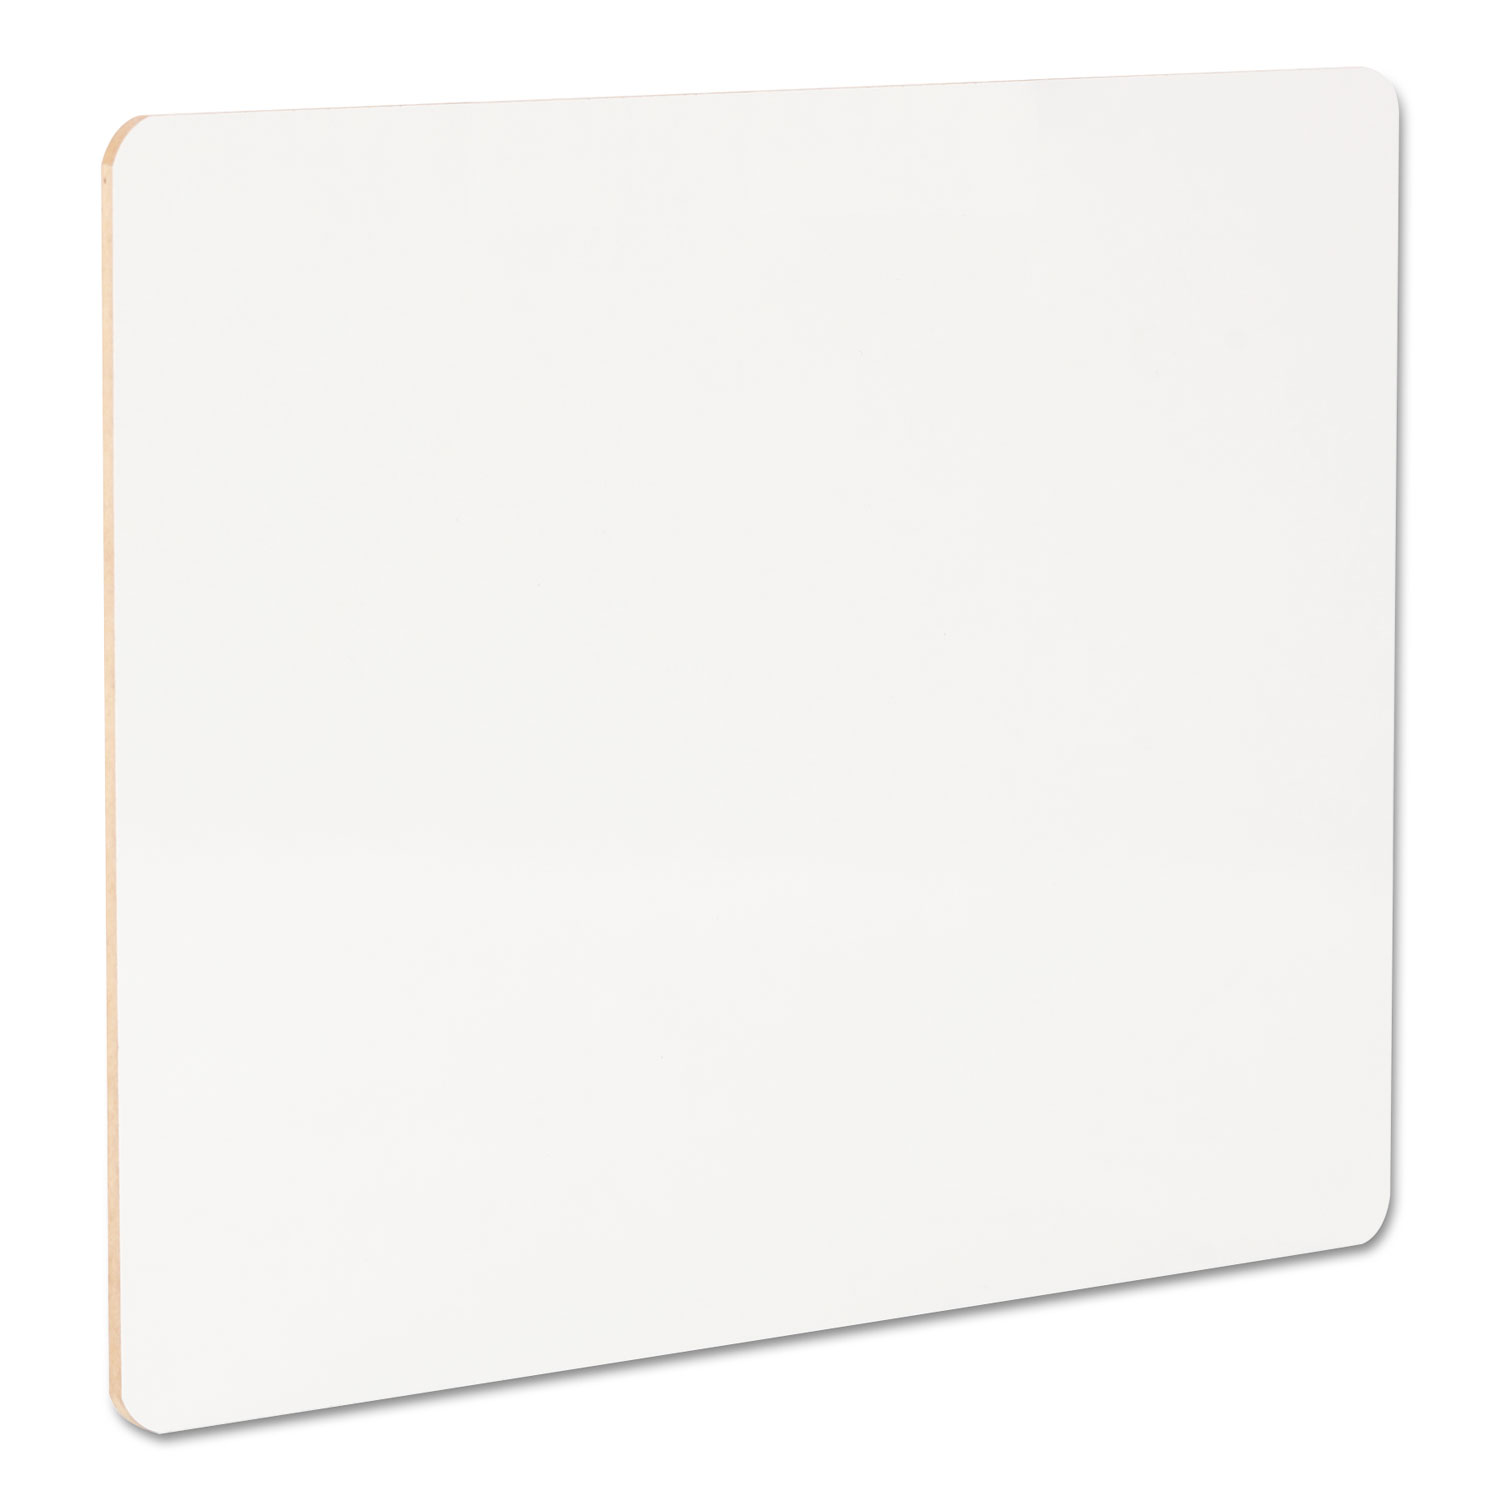  Universal UNV43910 Lap/Learning Dry-Erase Board, 11 3/4 x 8 3/4, White, 6/Pack (UNV43910) 